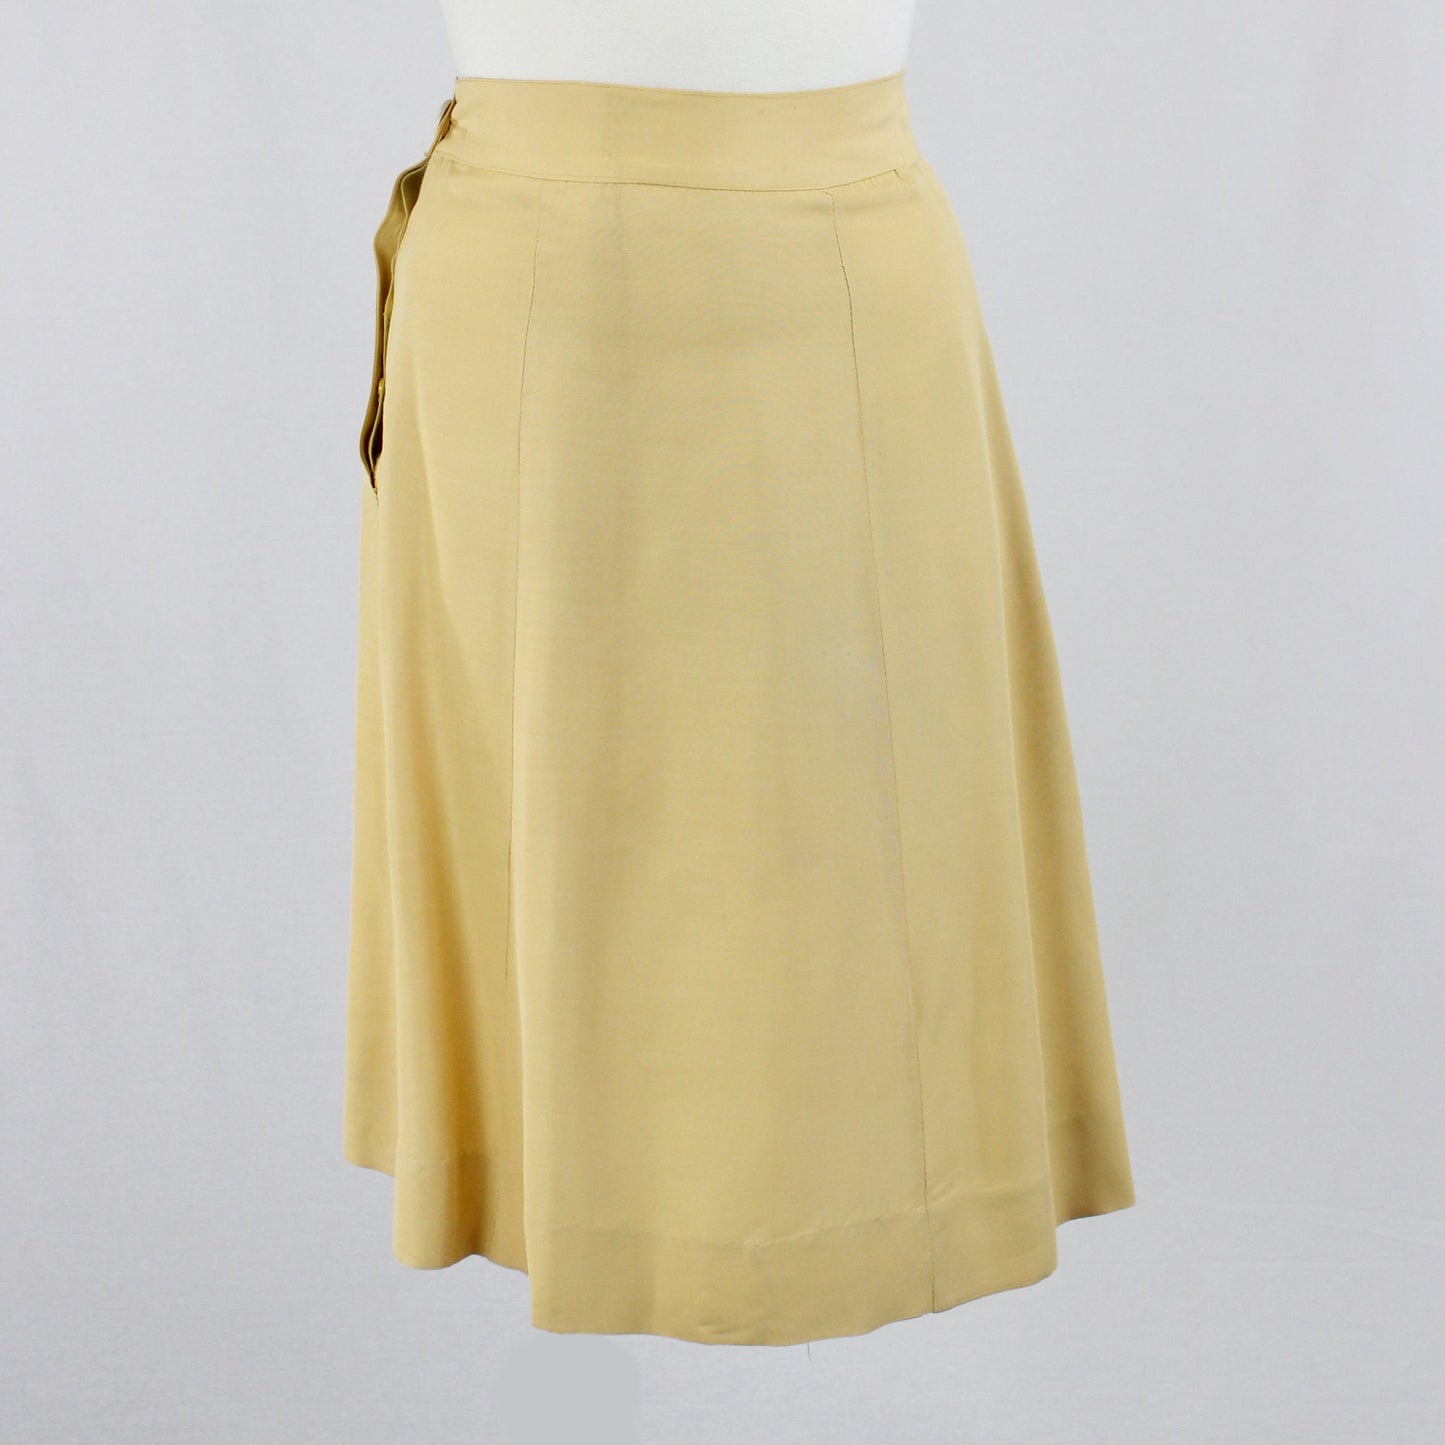 Vintage 1940's Butter Yellow Skirt